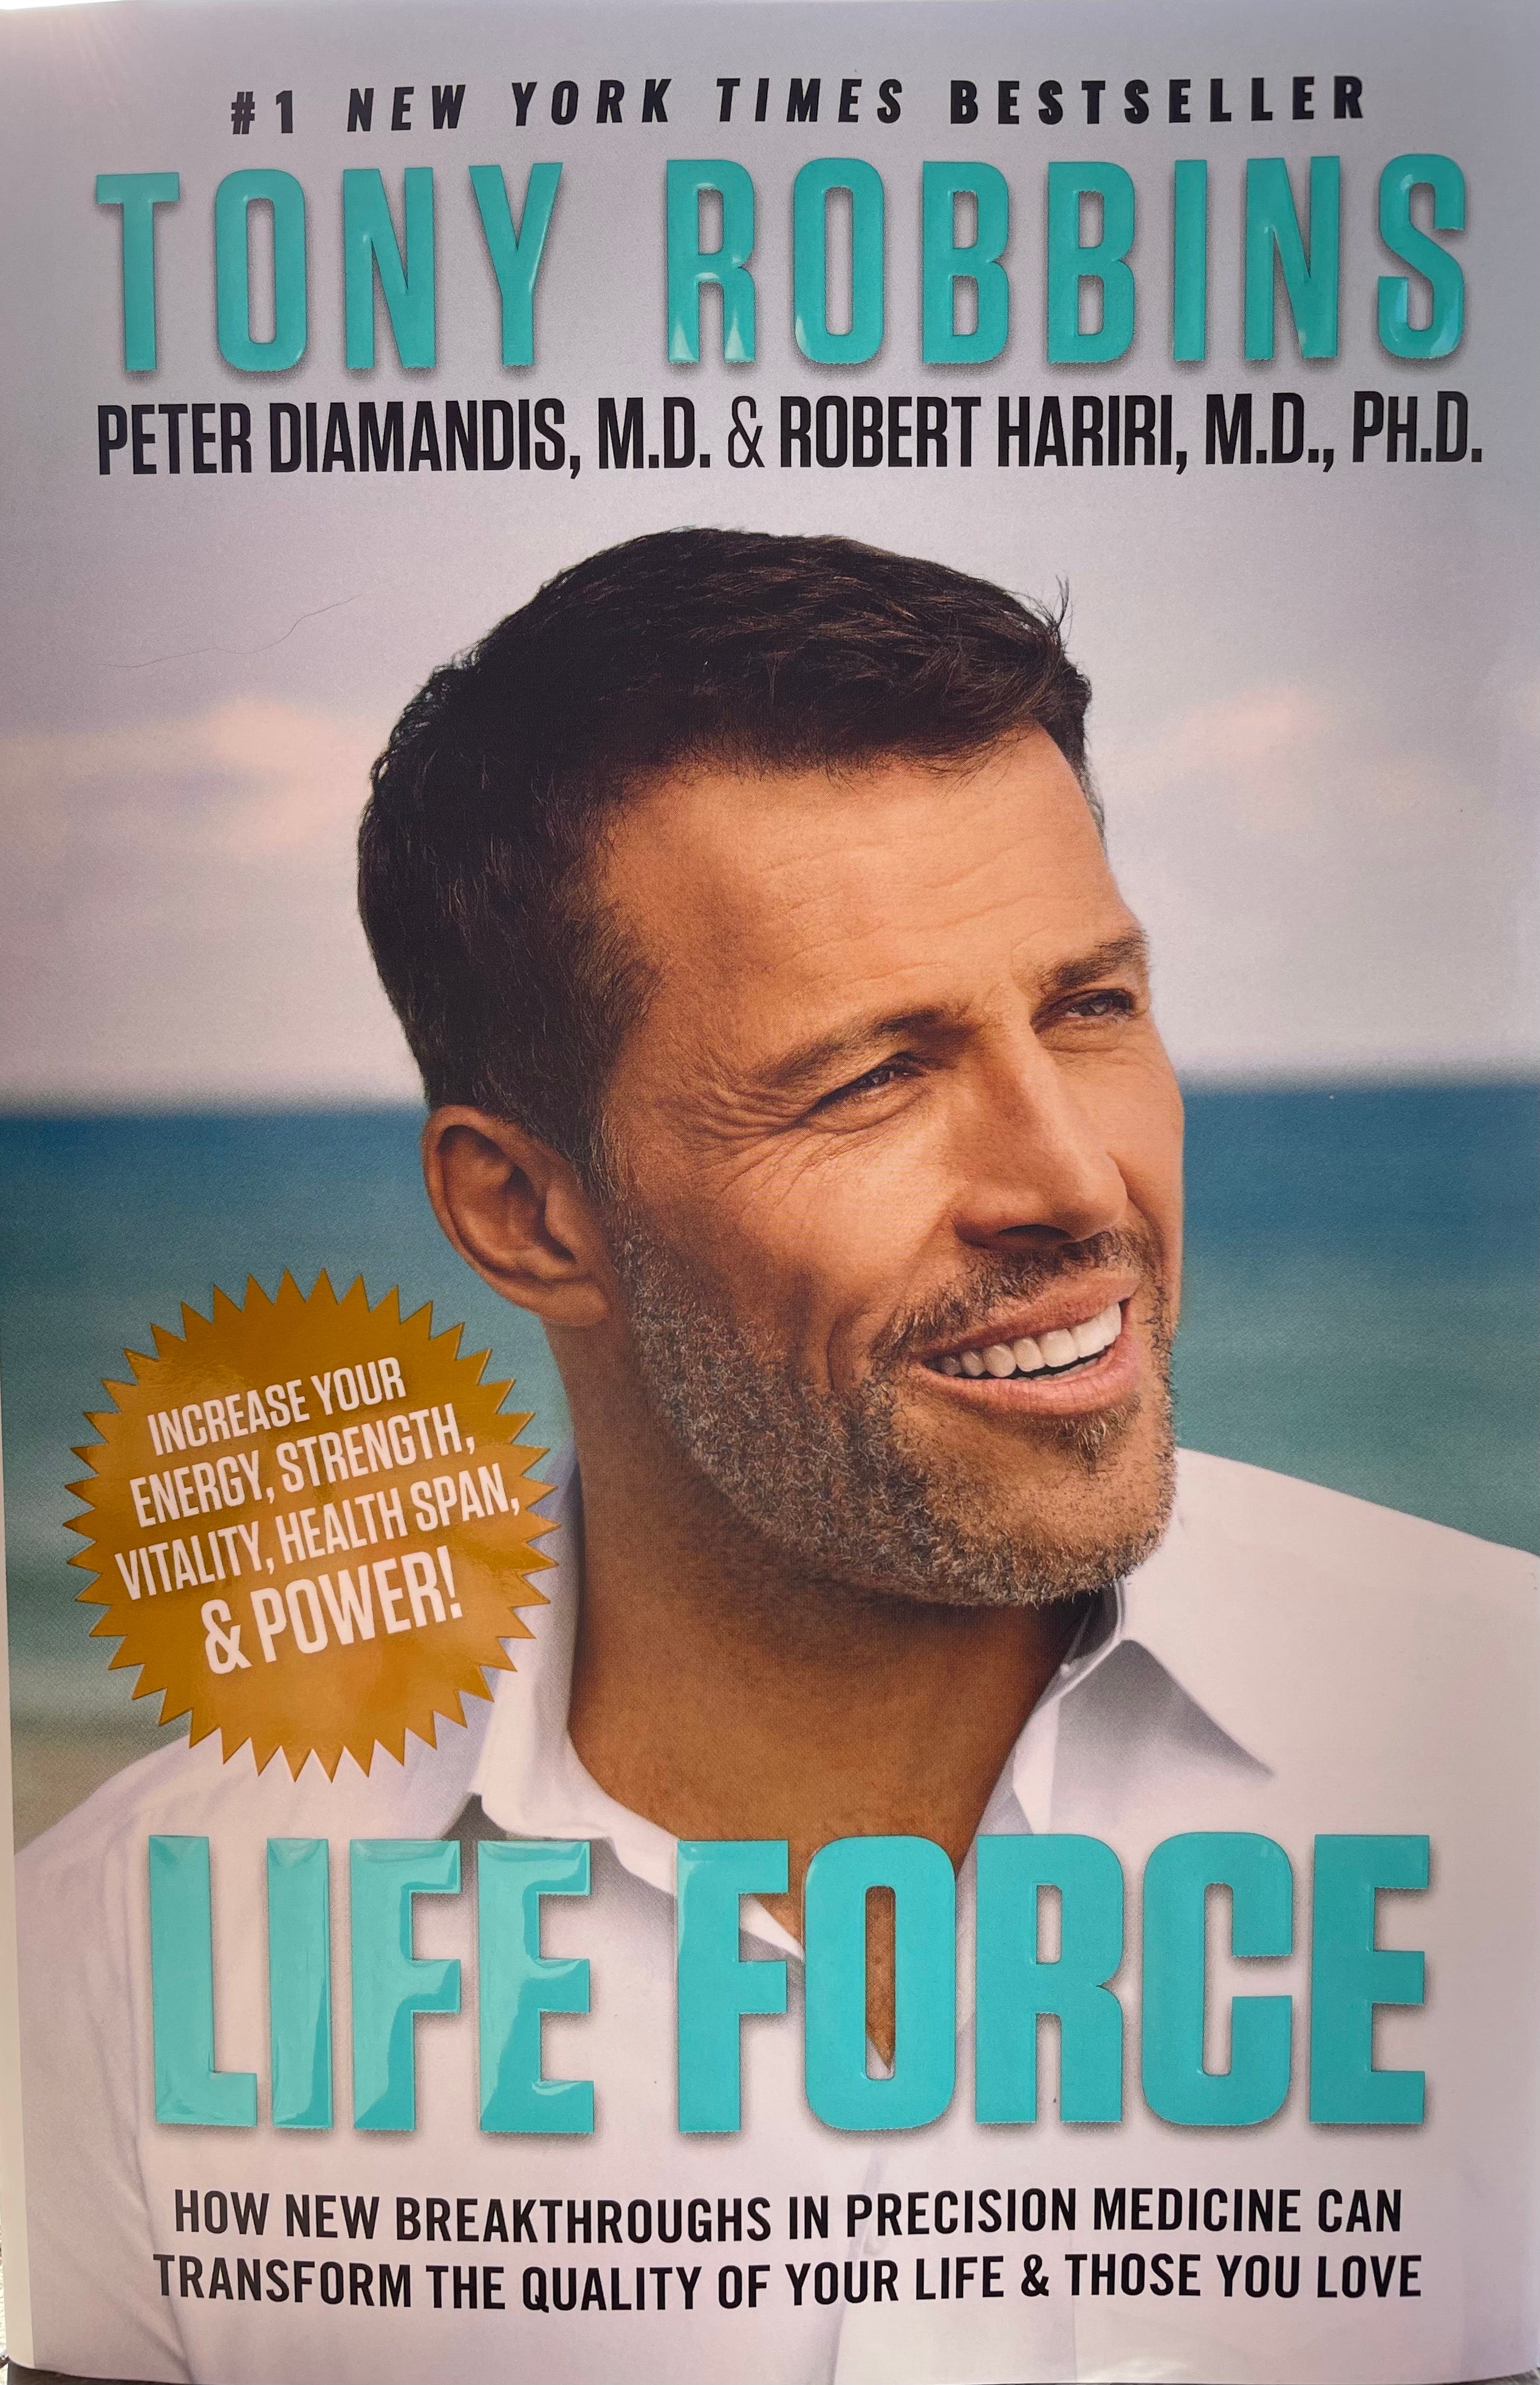 What I've learned so far from Tony Robbins' new book Life Force